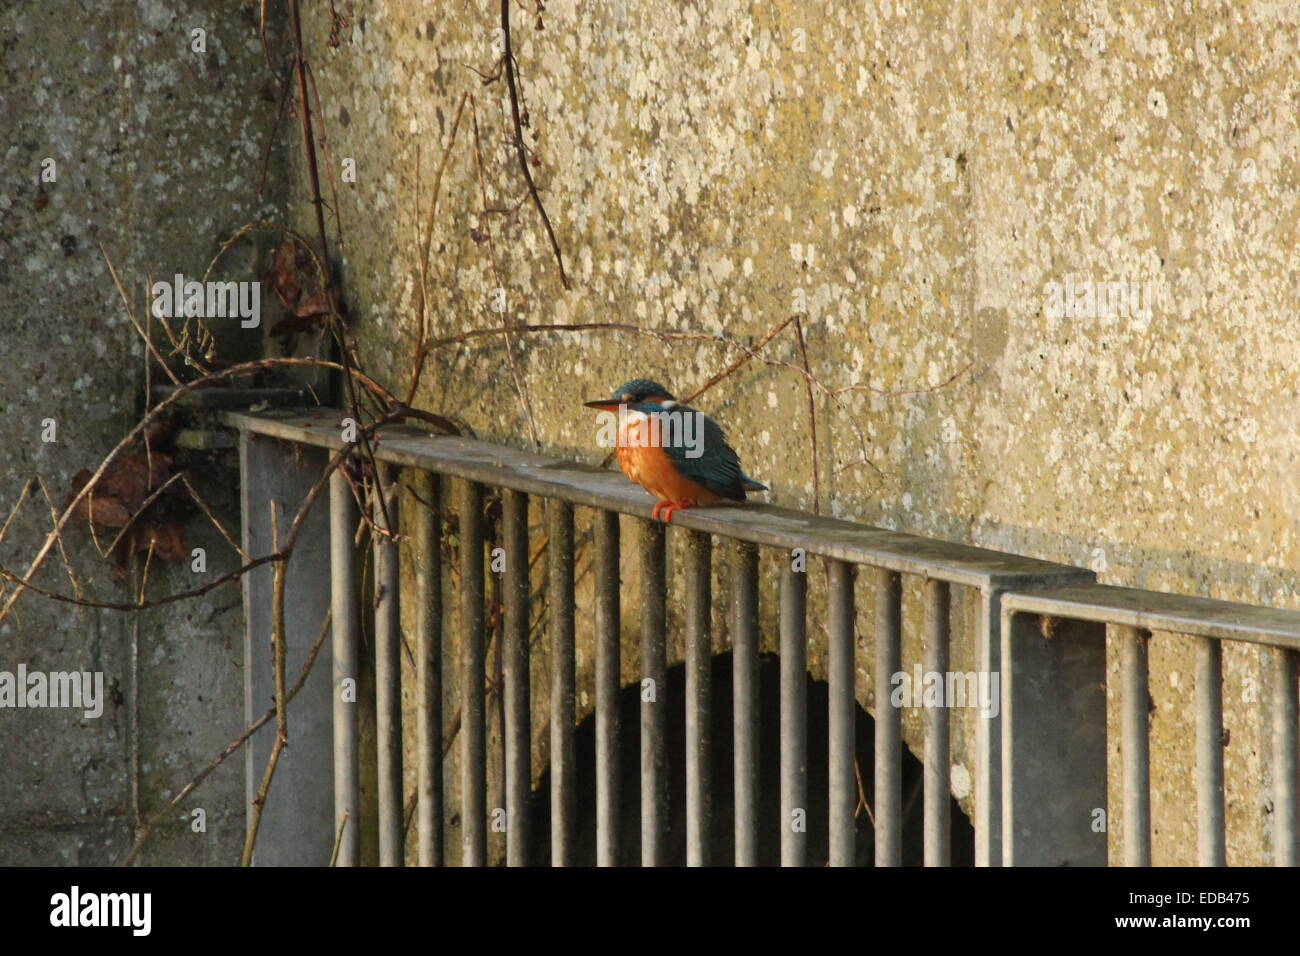 Kingfisher bird sitting on a water outlet into the river. Stock Photo